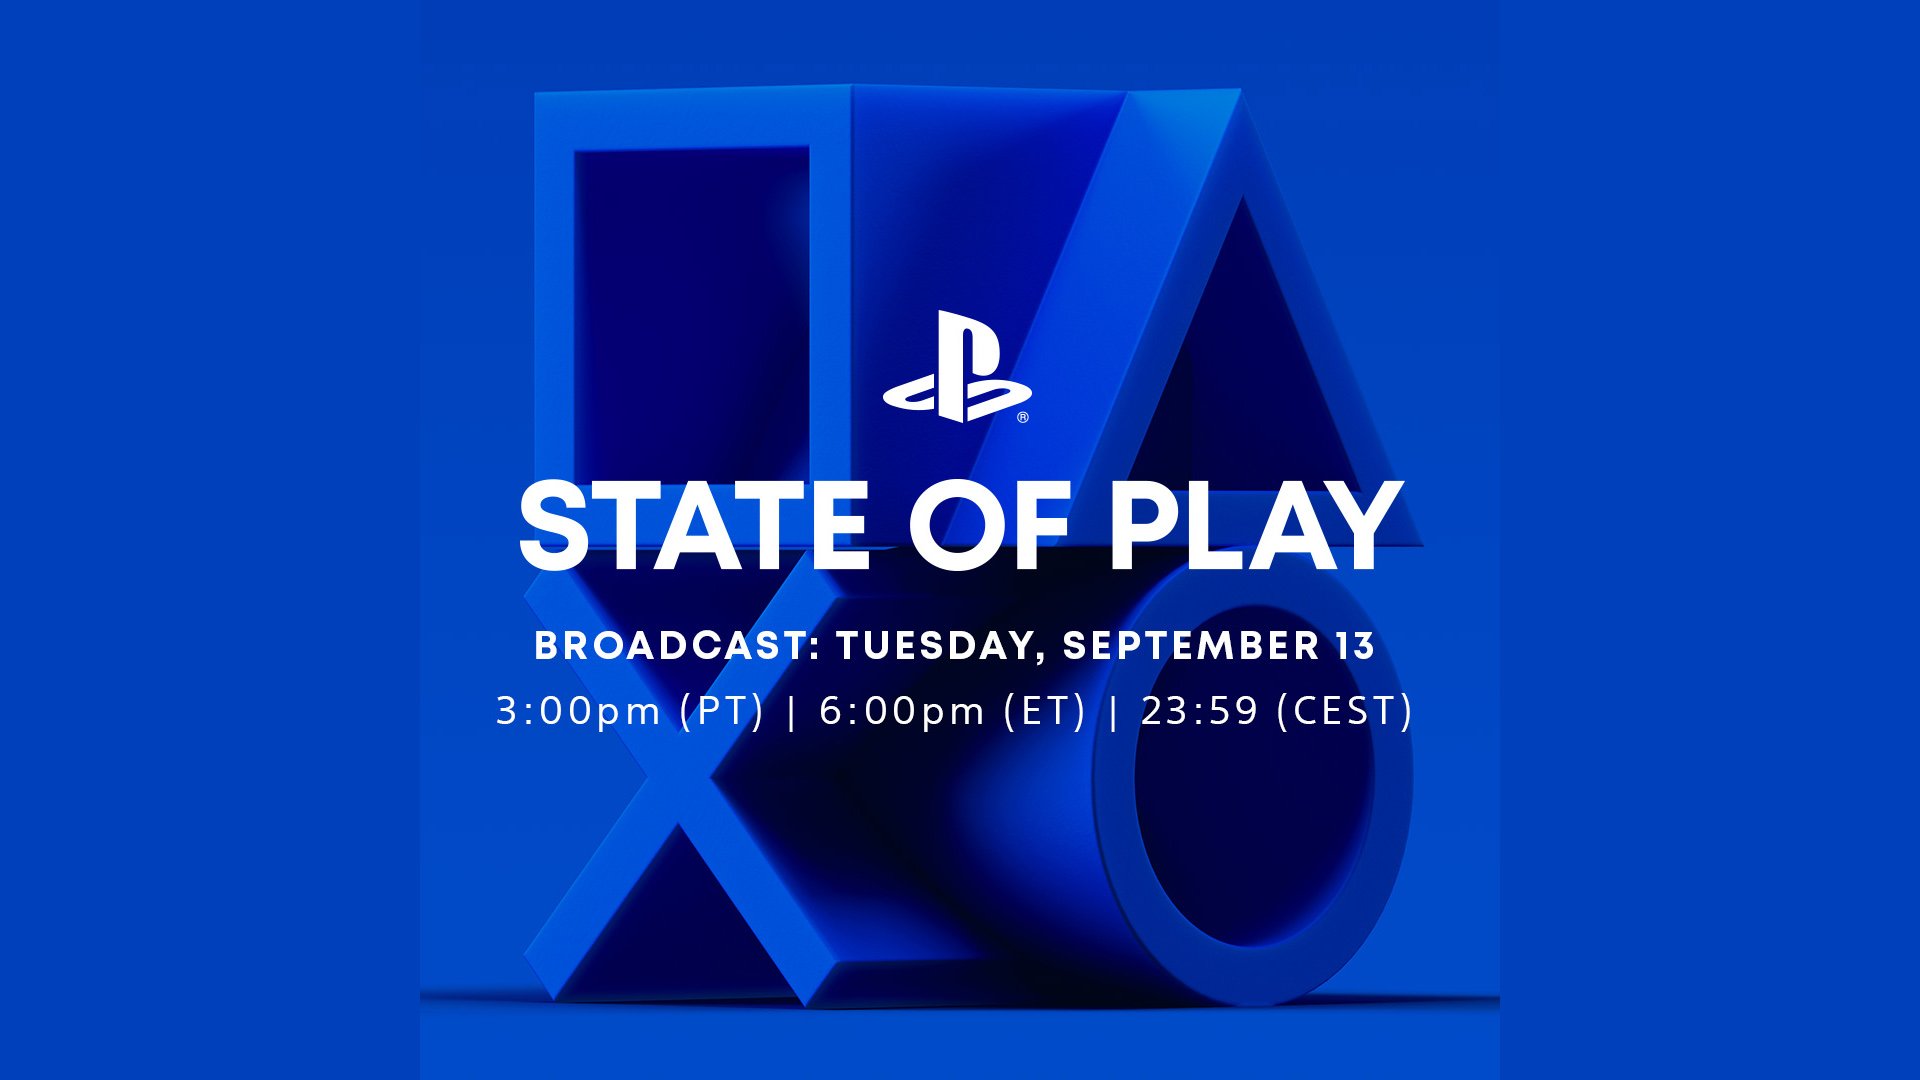 Playstation State Of Play June 2022 Trailers Announcements Resident Evil 4  Spider Man Pc Horizon Call Of The Mountain Street Fighter 6 Psvr2